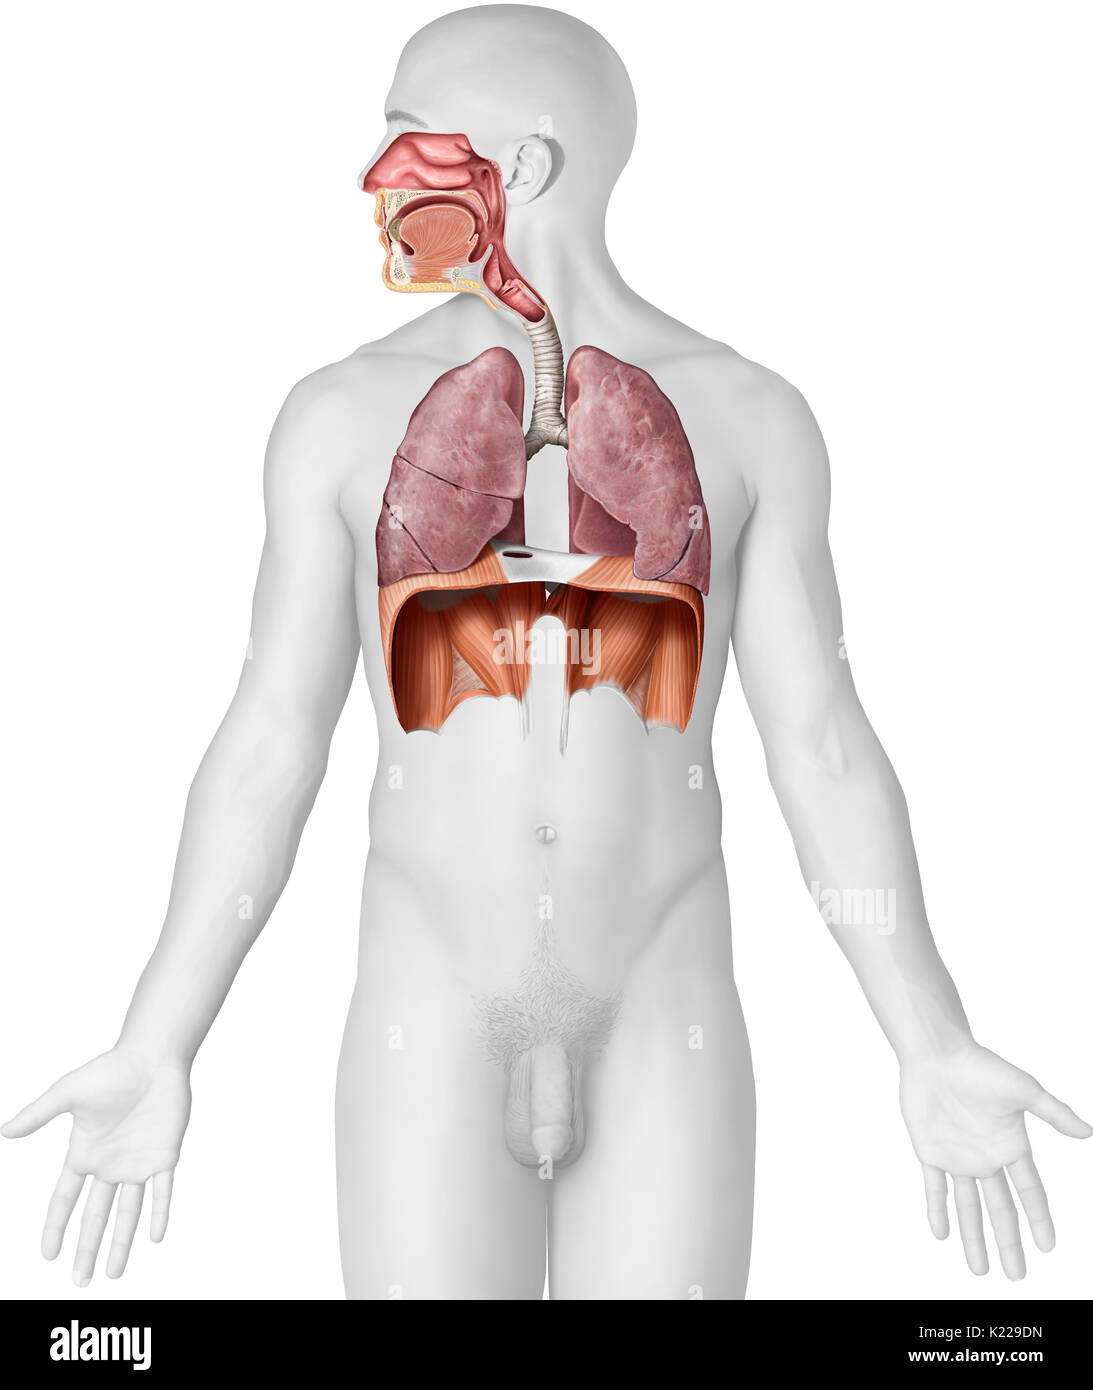 This image shows the organs of the respiratory system, which are the nasal cavity, the epiglottis, the pharynx, the larynx, the trachea, the lungs and the diaphragm. Stock Photo